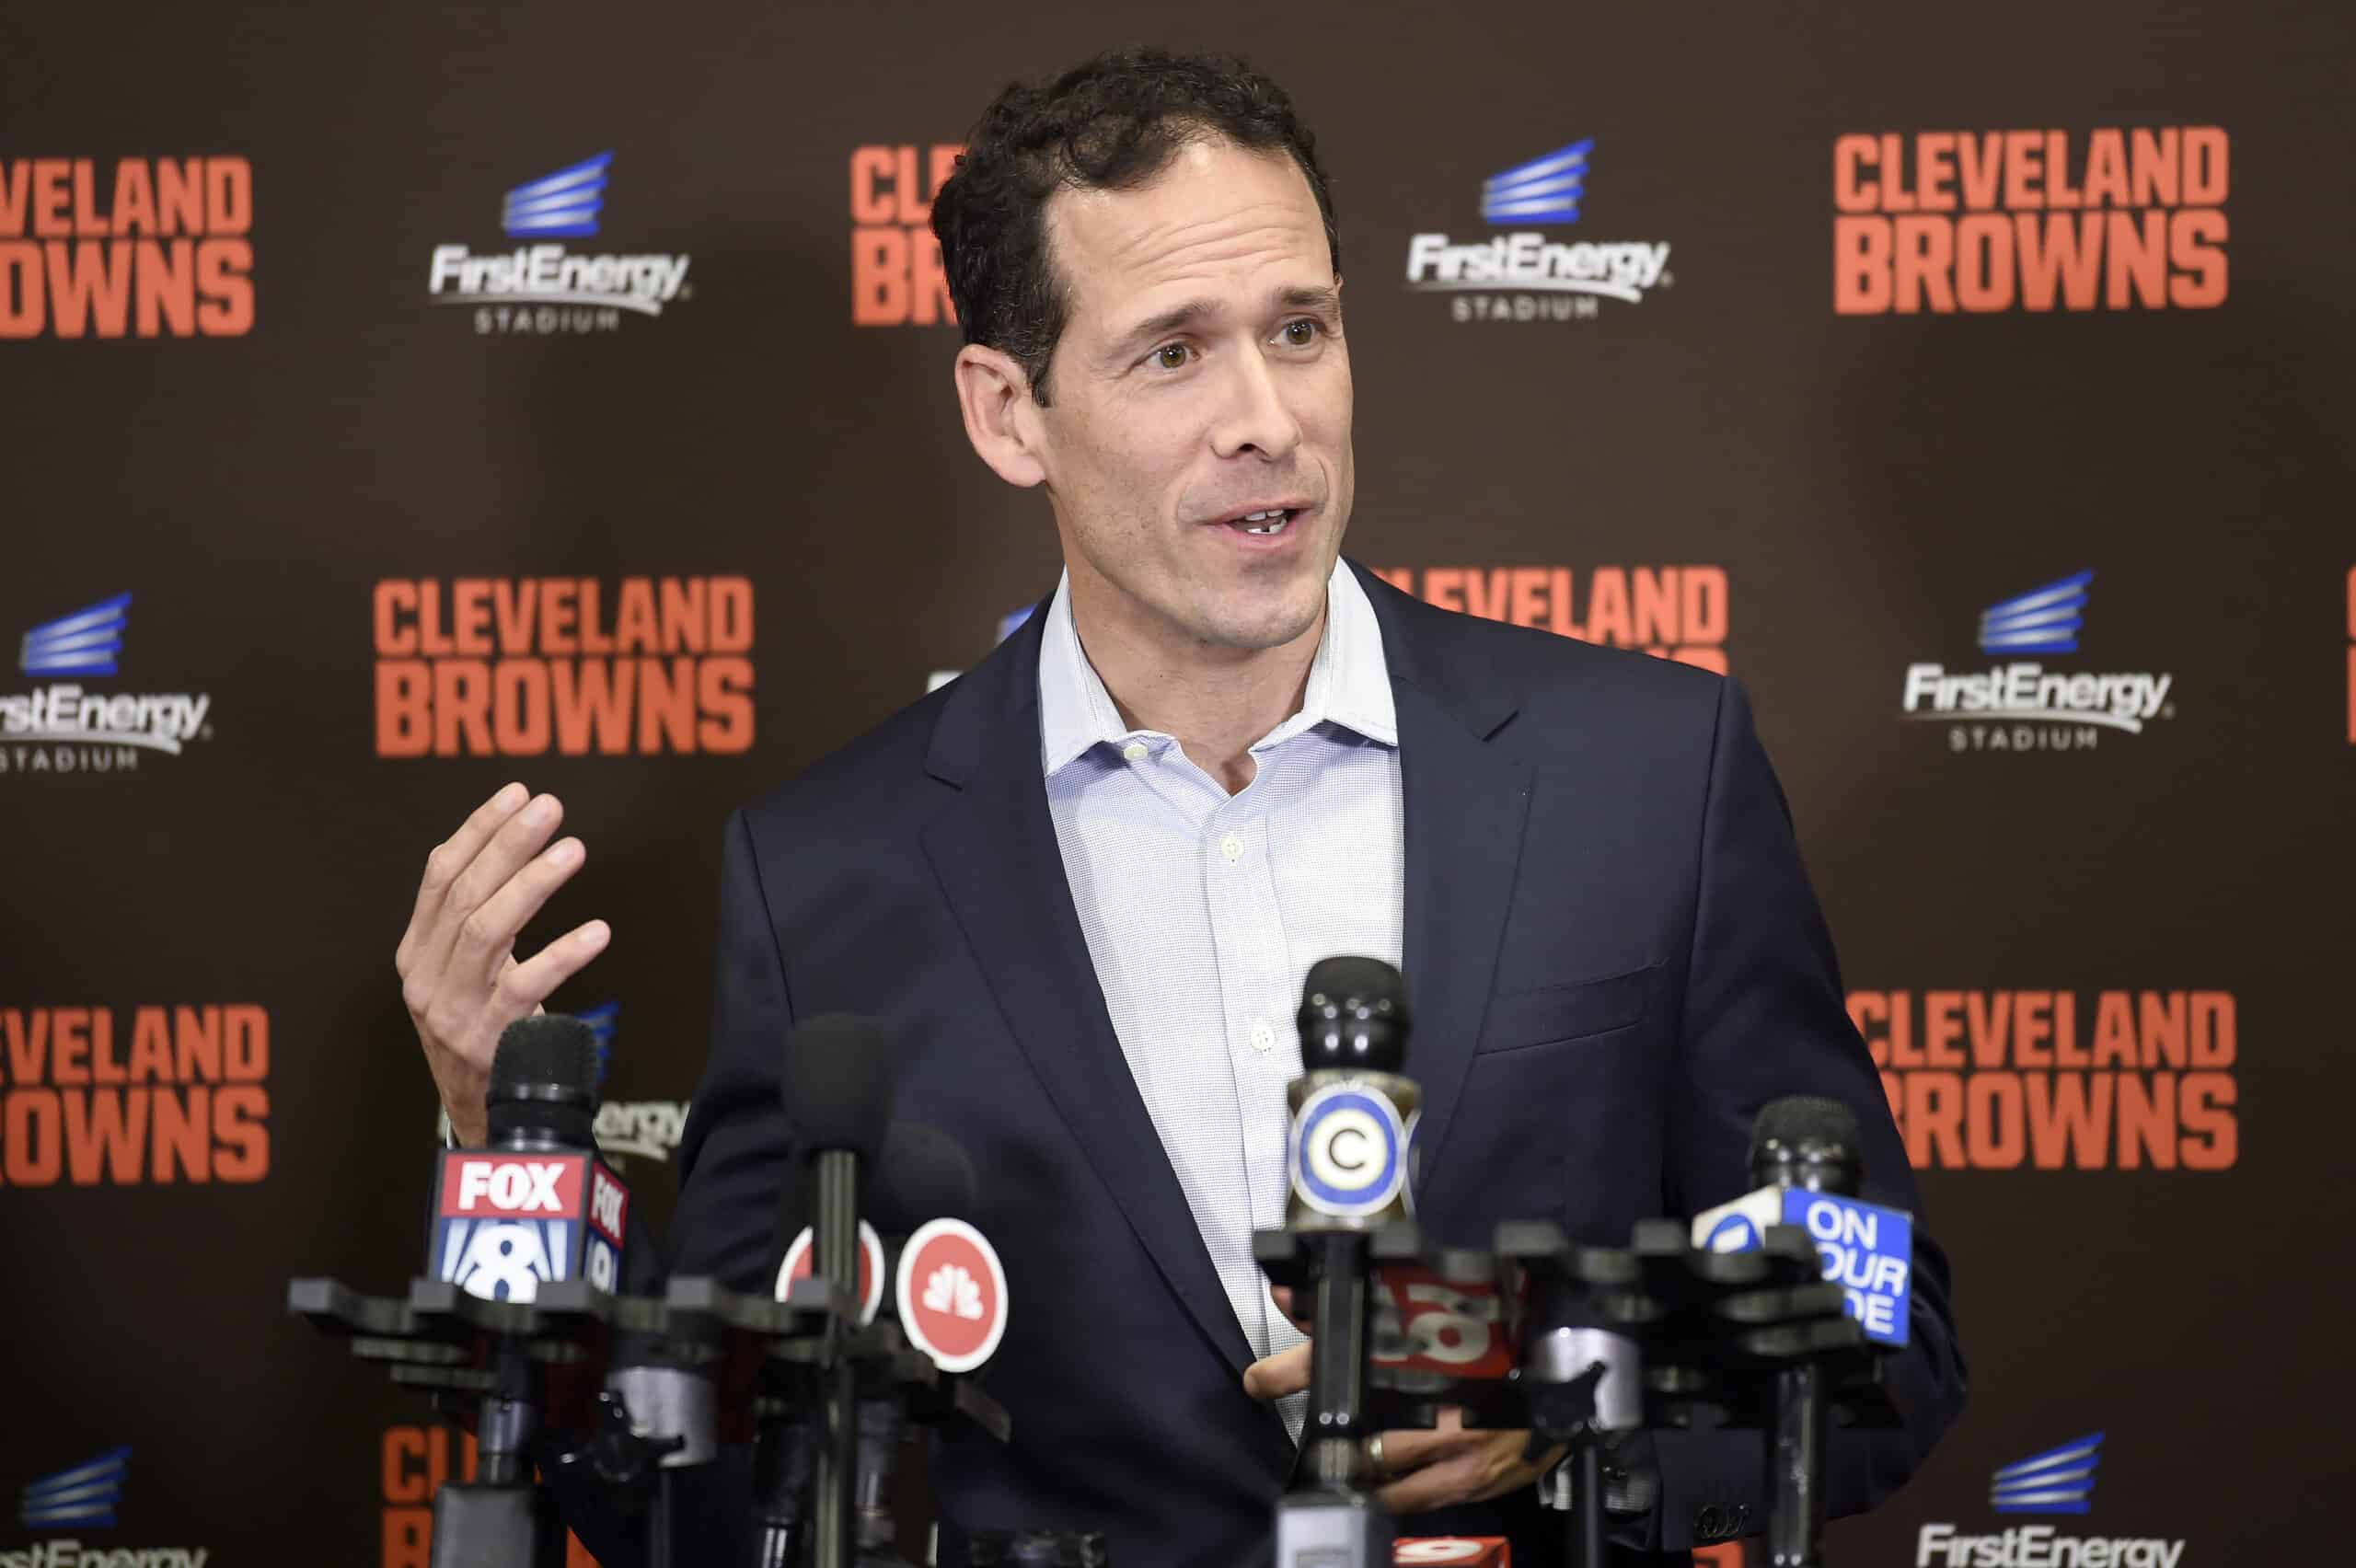 Paul DePodesta Cleveland Browns Chief Strategy Officer addresses the media after the Browns introduced Kevin Stefanski as the Browns new head coach on January 14, 2020 in Cleveland, Ohio.